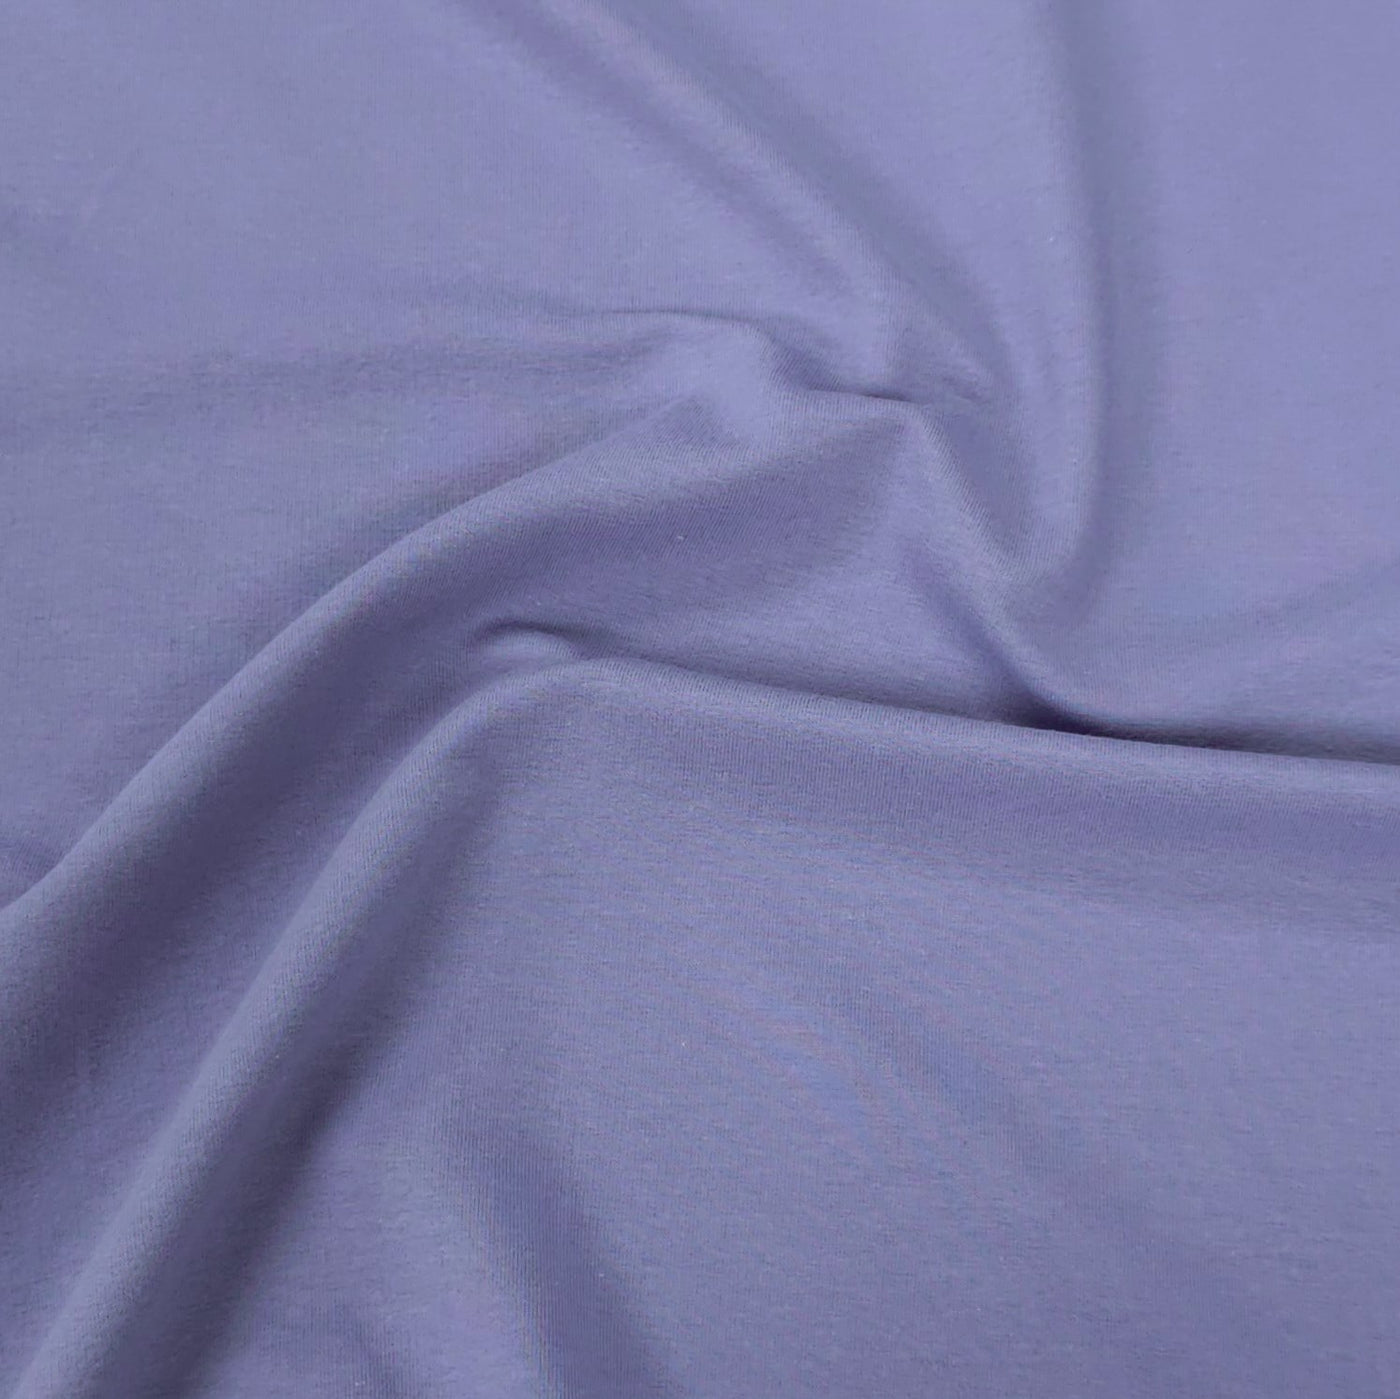 Breathable Cotton French Terry Fabric for Warm and Cozy Clothing